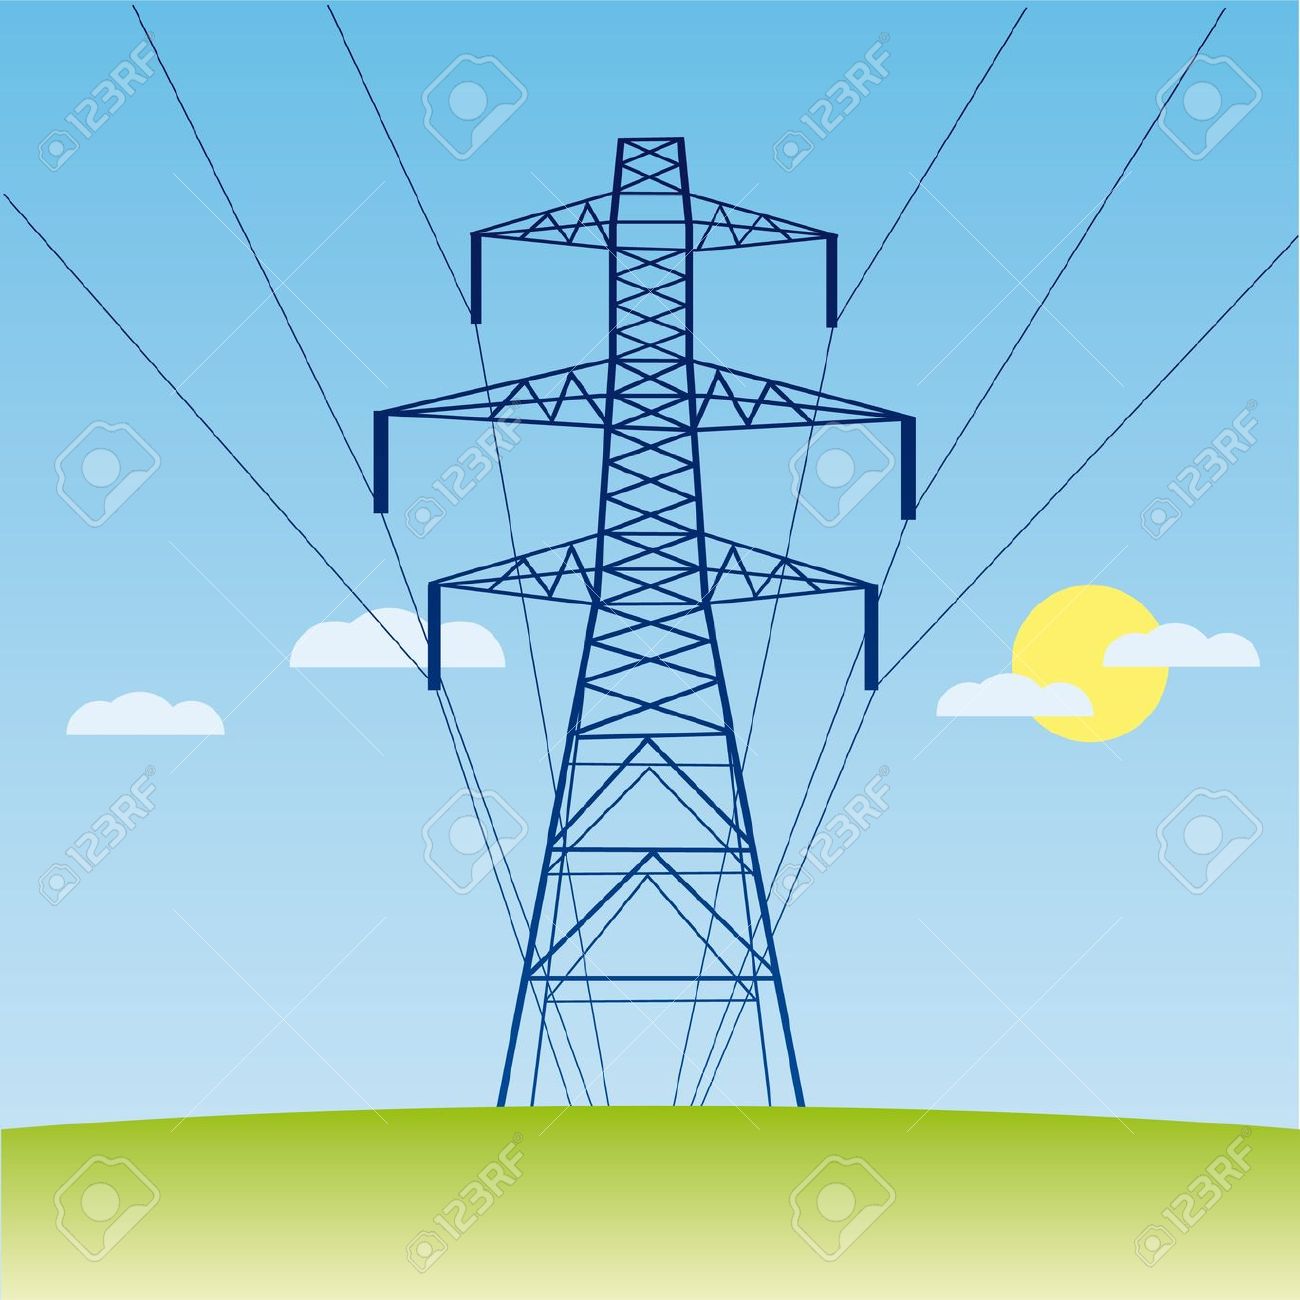 free clipart power lines - photo #37